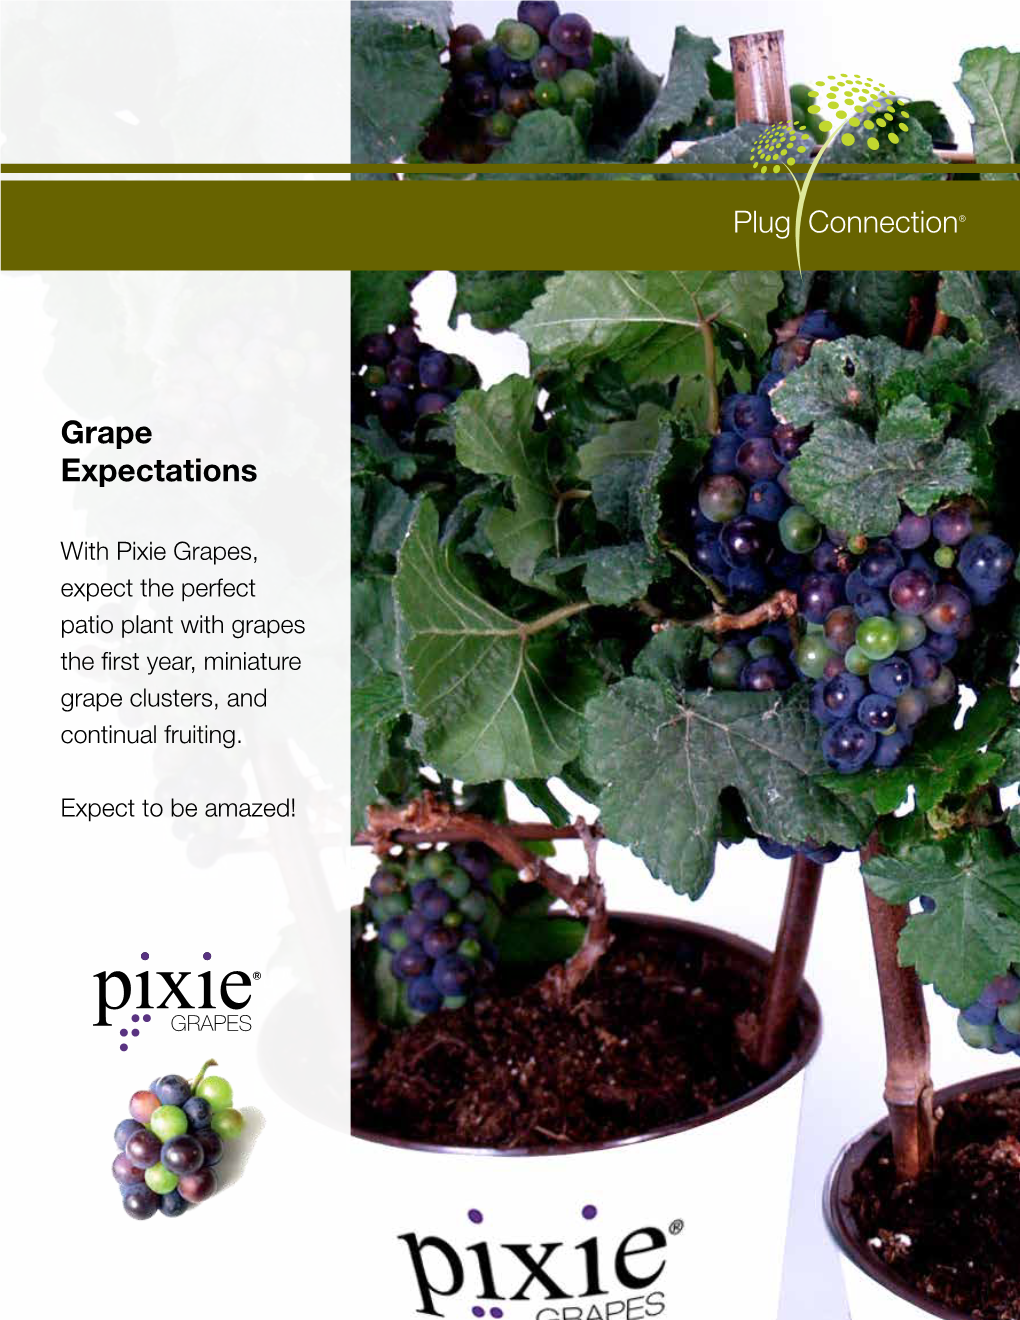 With Pixie Grapes, Expect the Perfect Patio Plant with Grapes the First Year, Miniature Grape Clusters, and Continual Fruiting